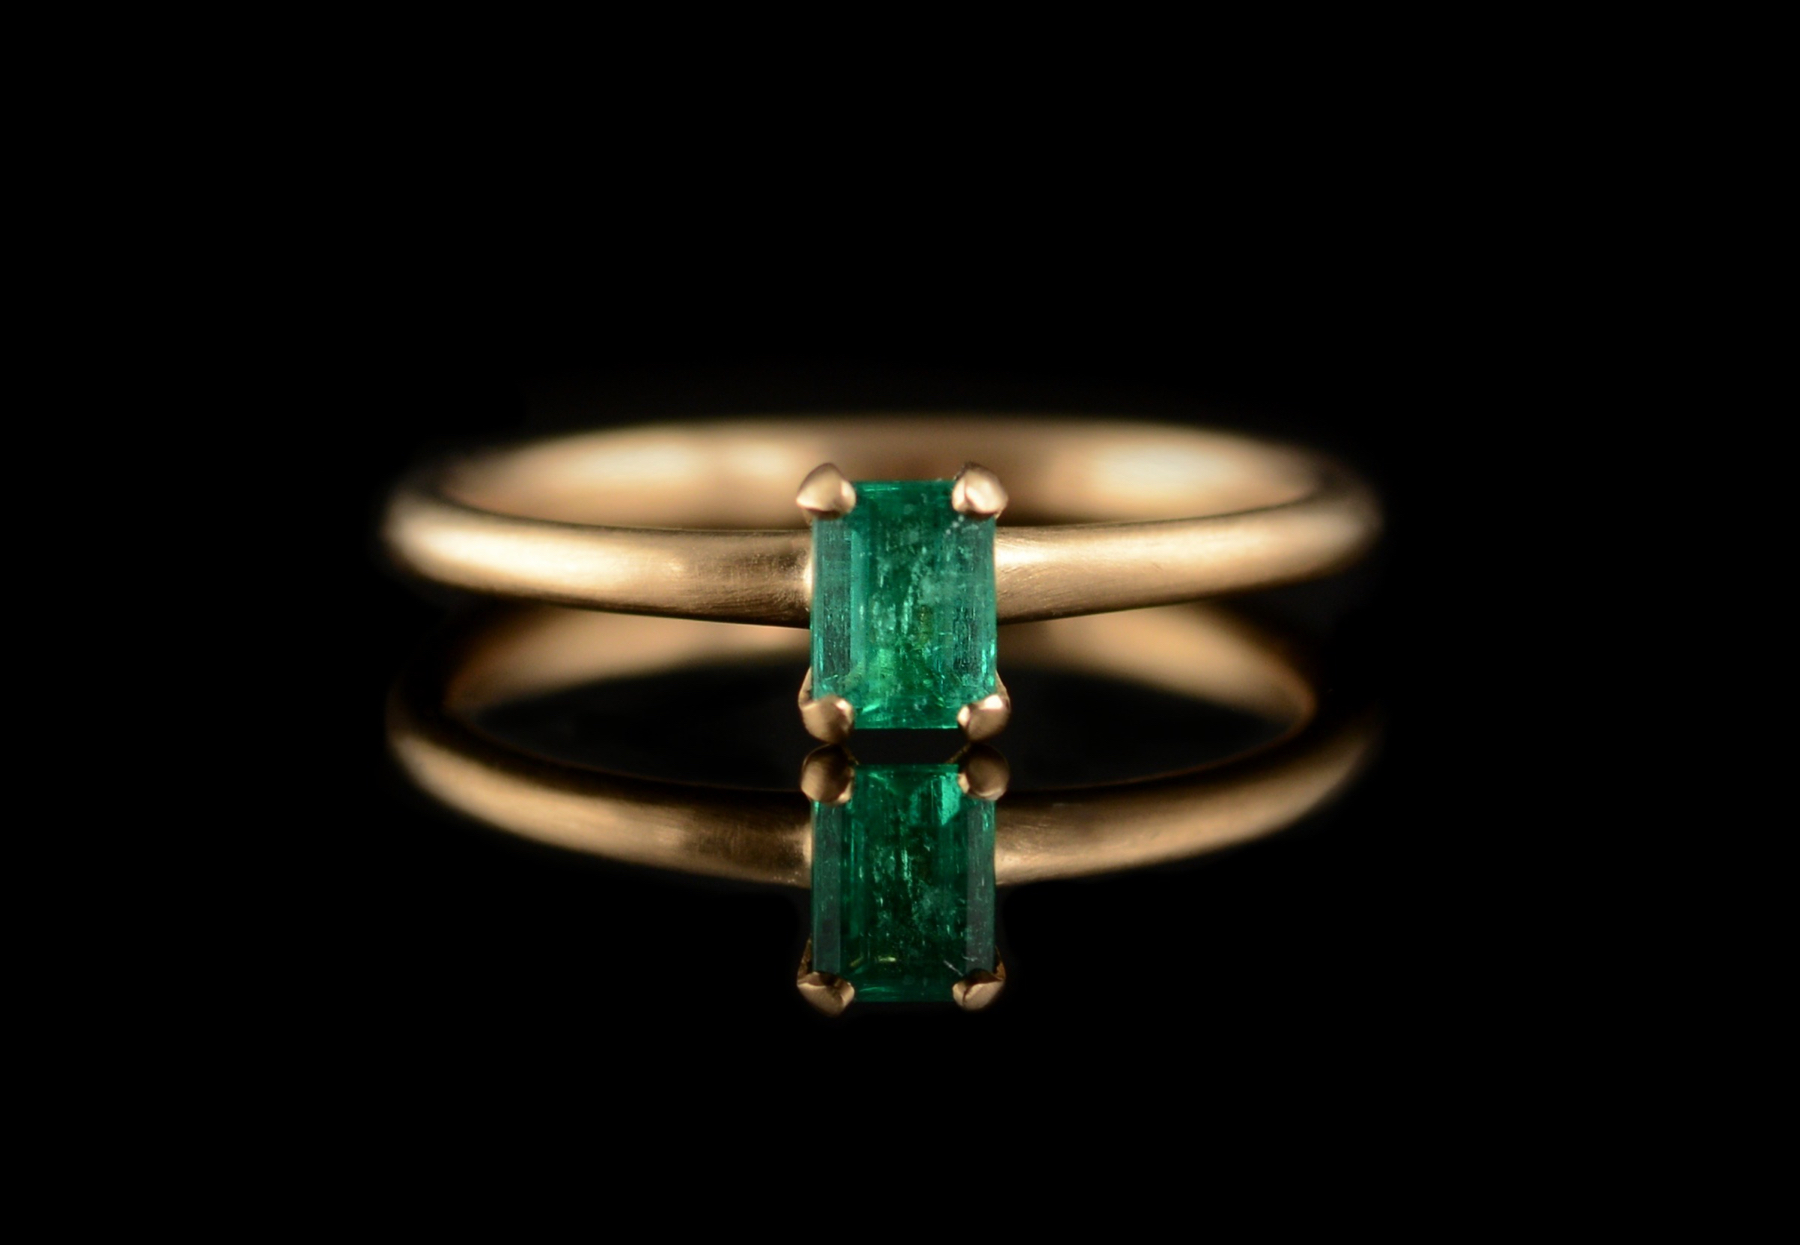 Bespoke rose gold and emerald 4-claw engagement ring